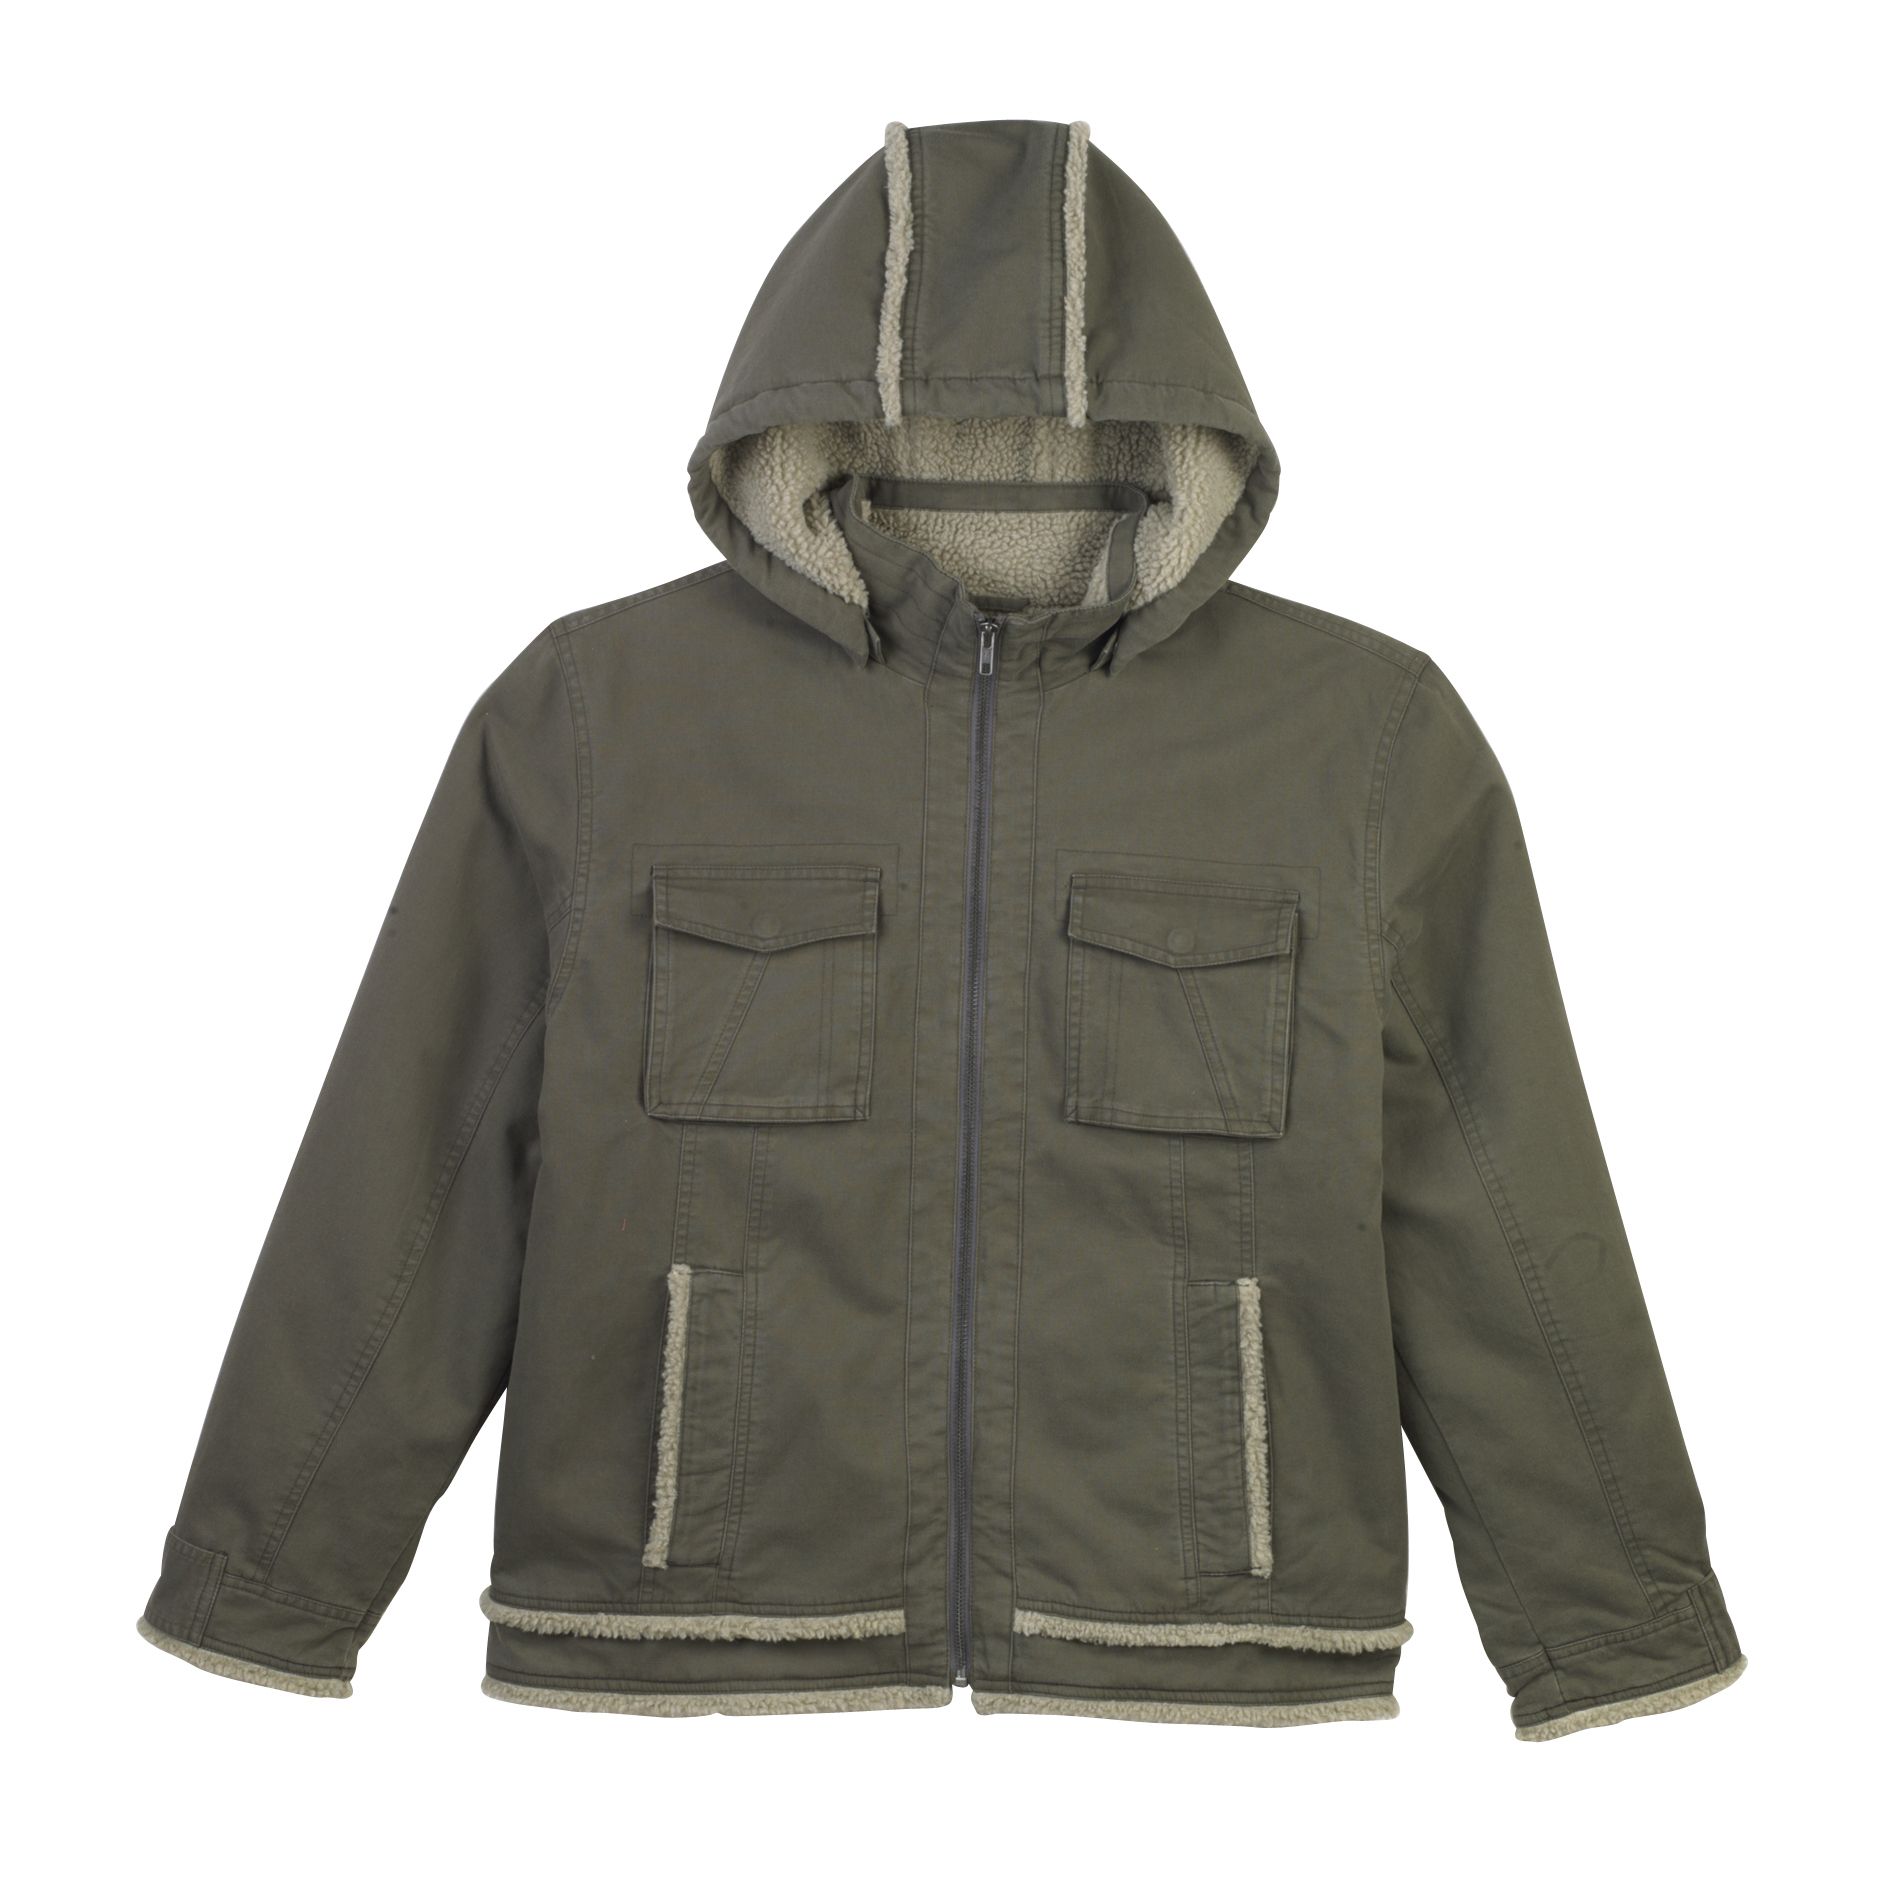 Basic Editions Men's Sherpa Lined Canvas Jacket With Detachable Hood